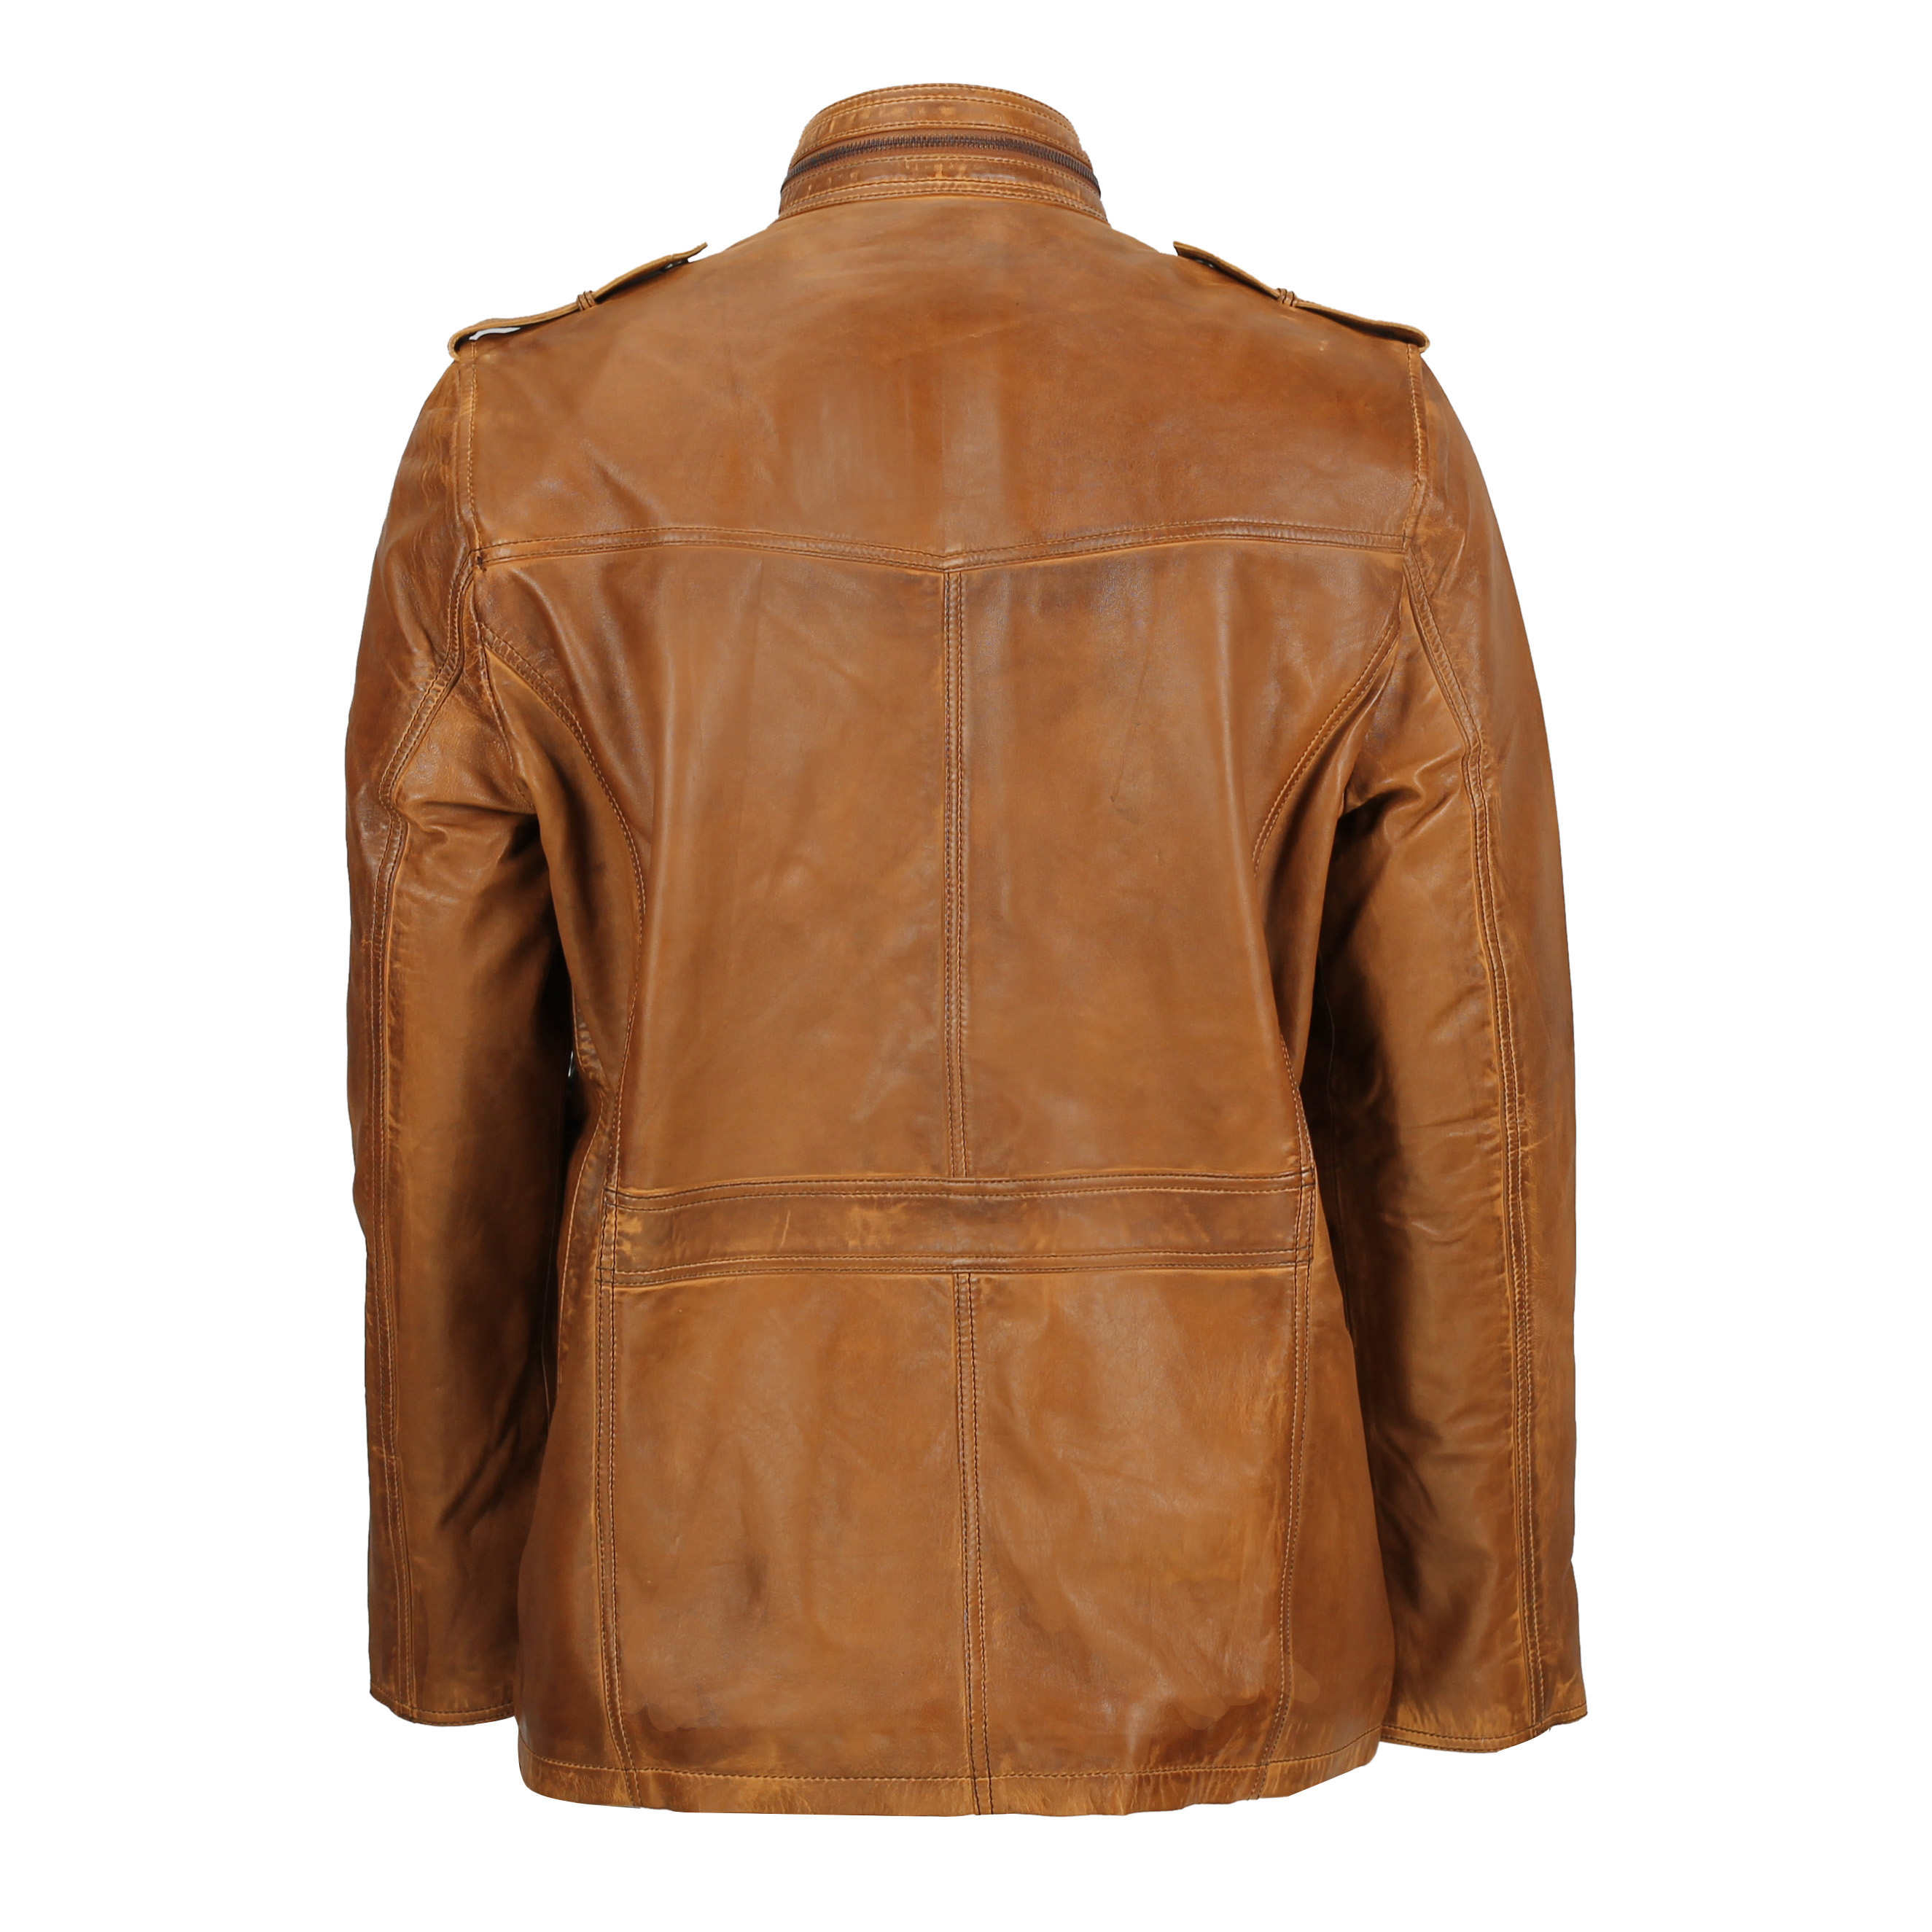 MEN’S MILITARY LEATHER JACKET IN TAN